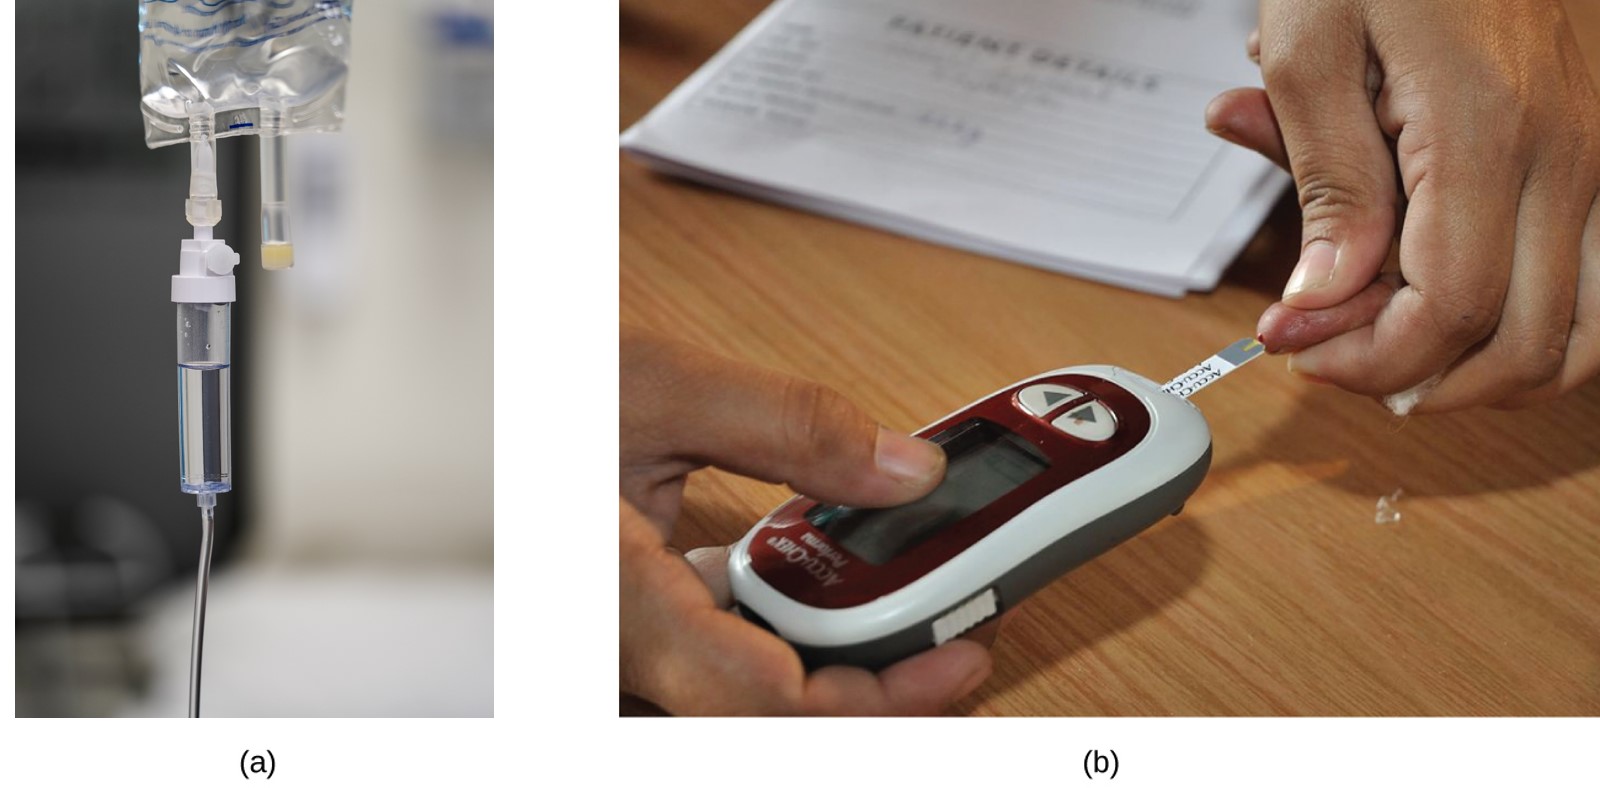 In figure (a), a bag of physiological saline in a typical hospital setting is shown. Saline solution is given as a 0.9% mass-volume solution to patients. In figure (b), a glucose monitoring device is depicted, which measures glucose levels in blood. The normal range for blood glucose is around 70 to 100 milligrams per deciliter.